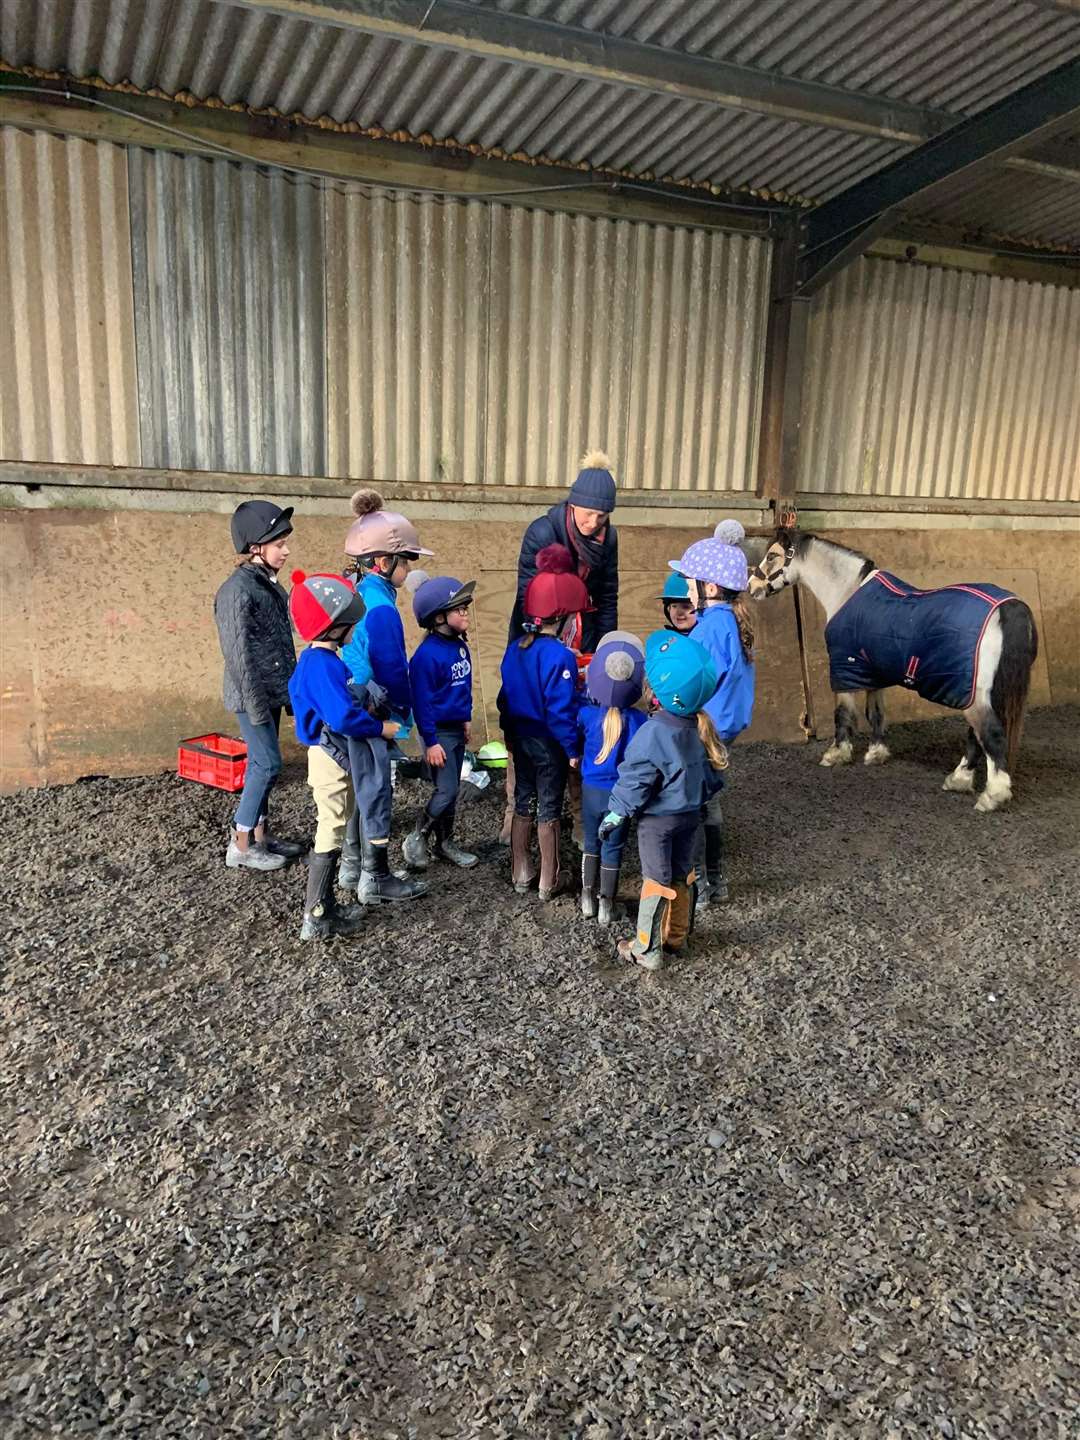 Nine Pony Club members completed their Rider Safety achievement badge.